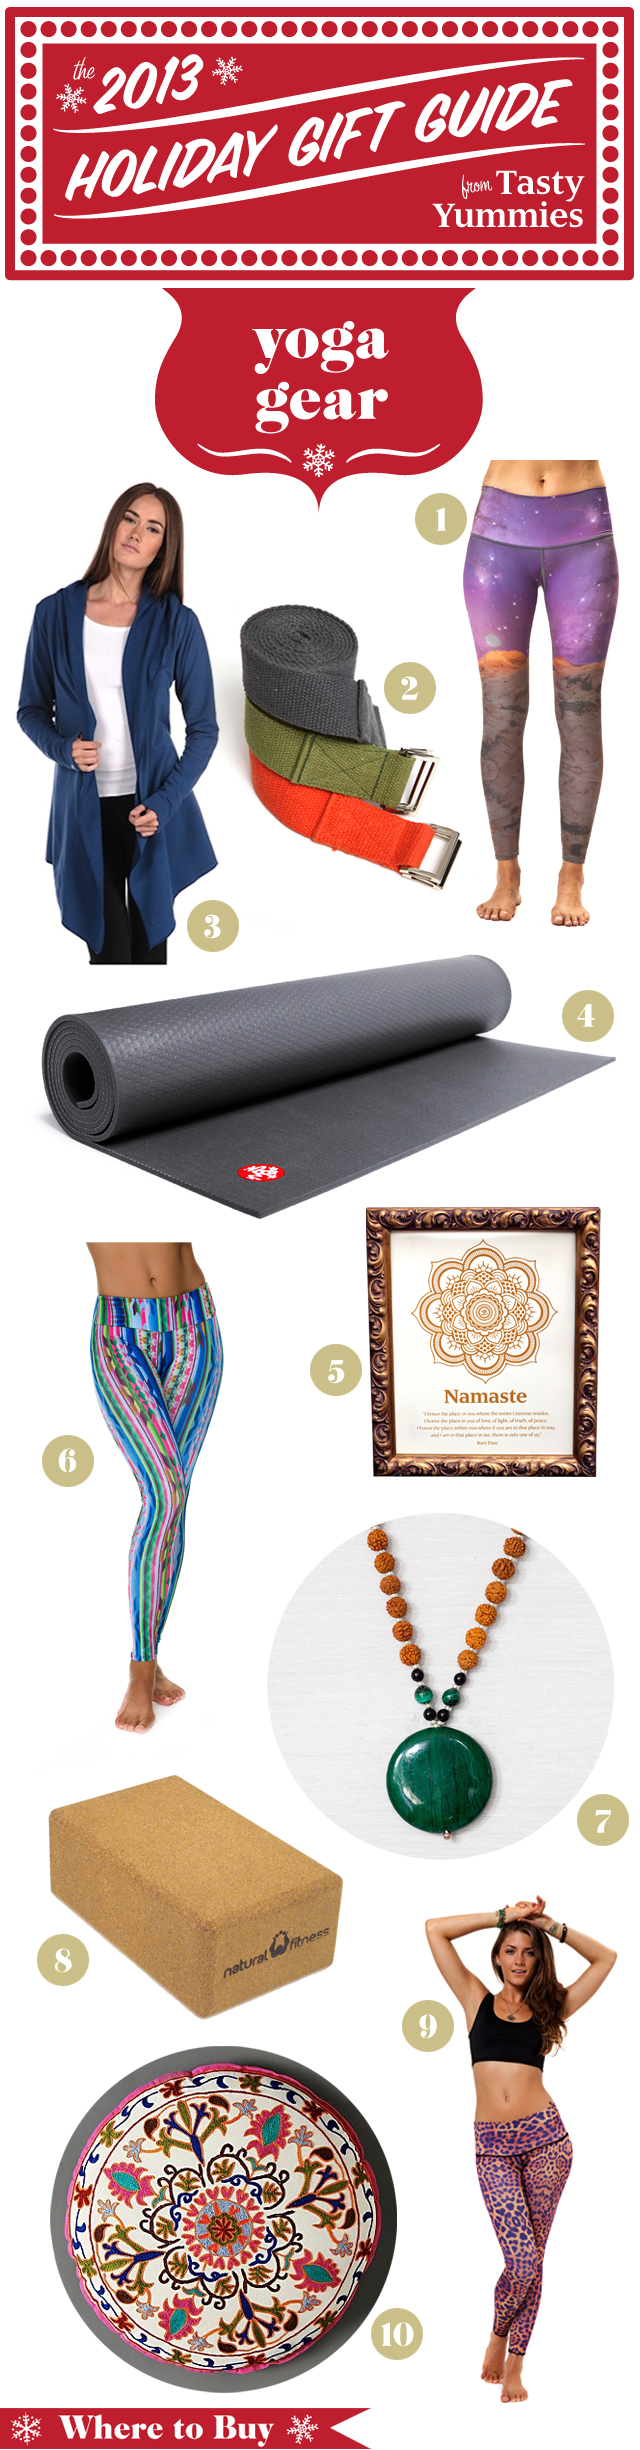 Holiday Gift Guide: Yoga Gear